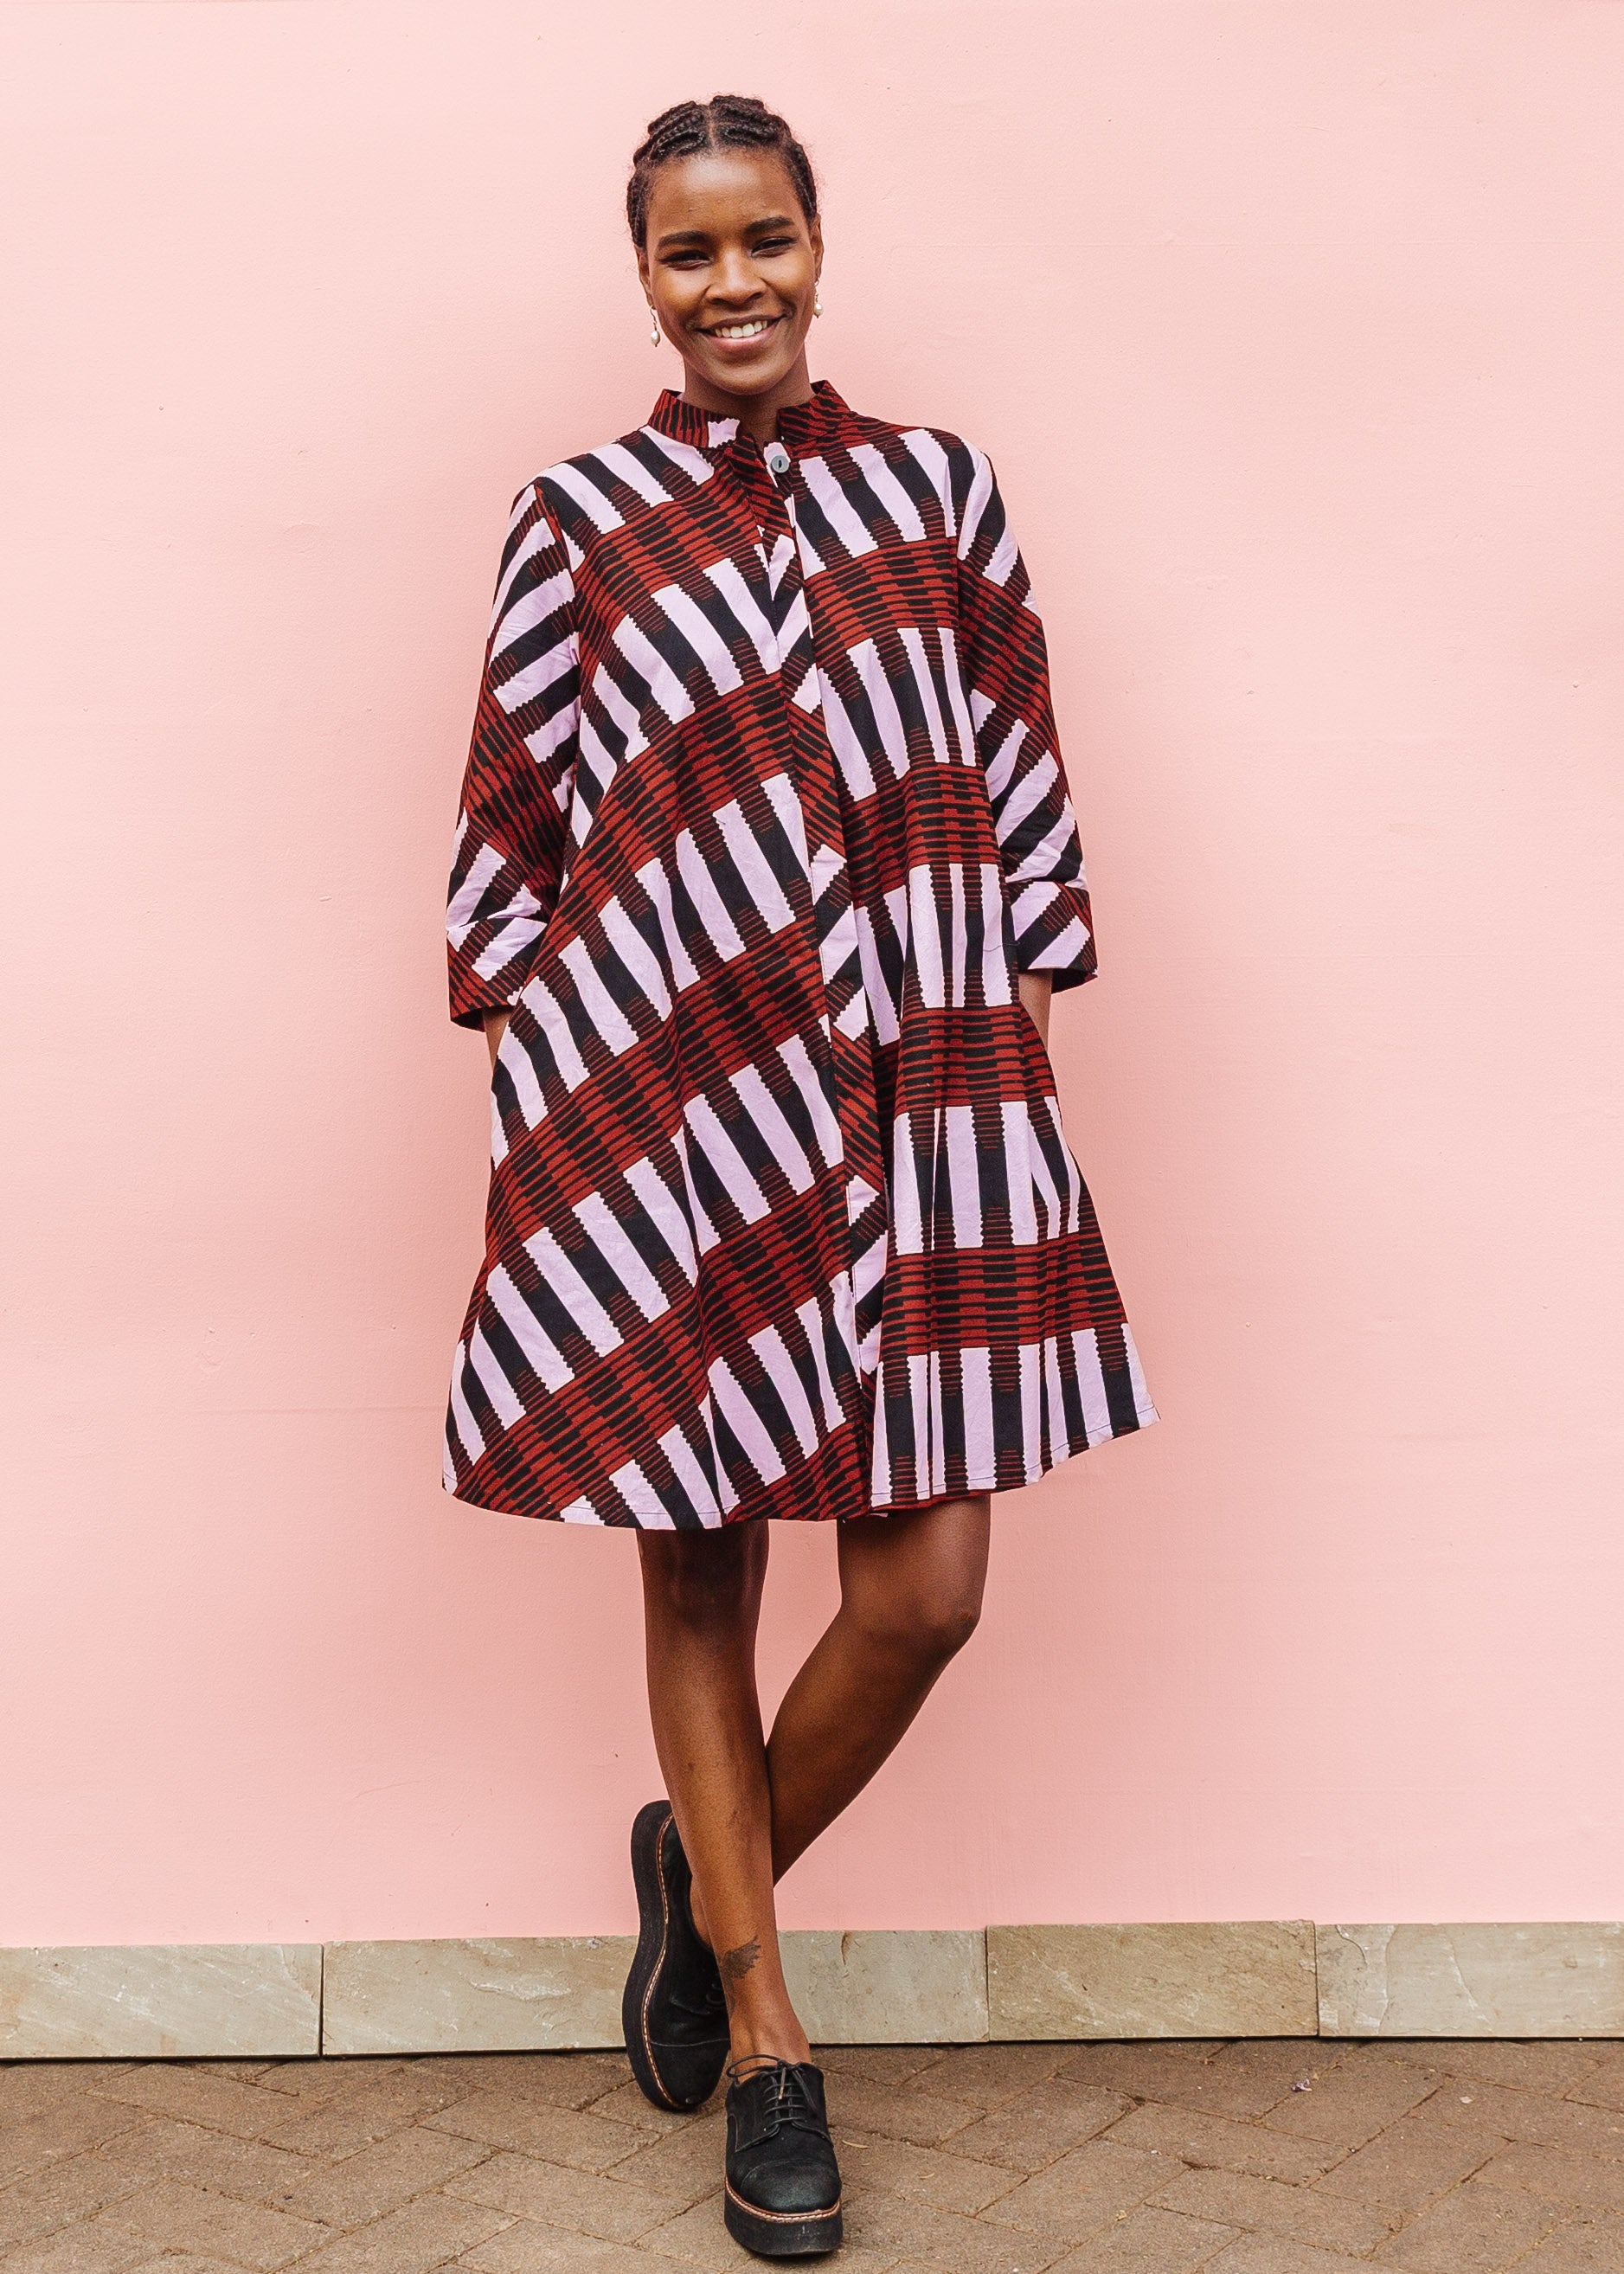 Model wearing pink and brown striped dress.